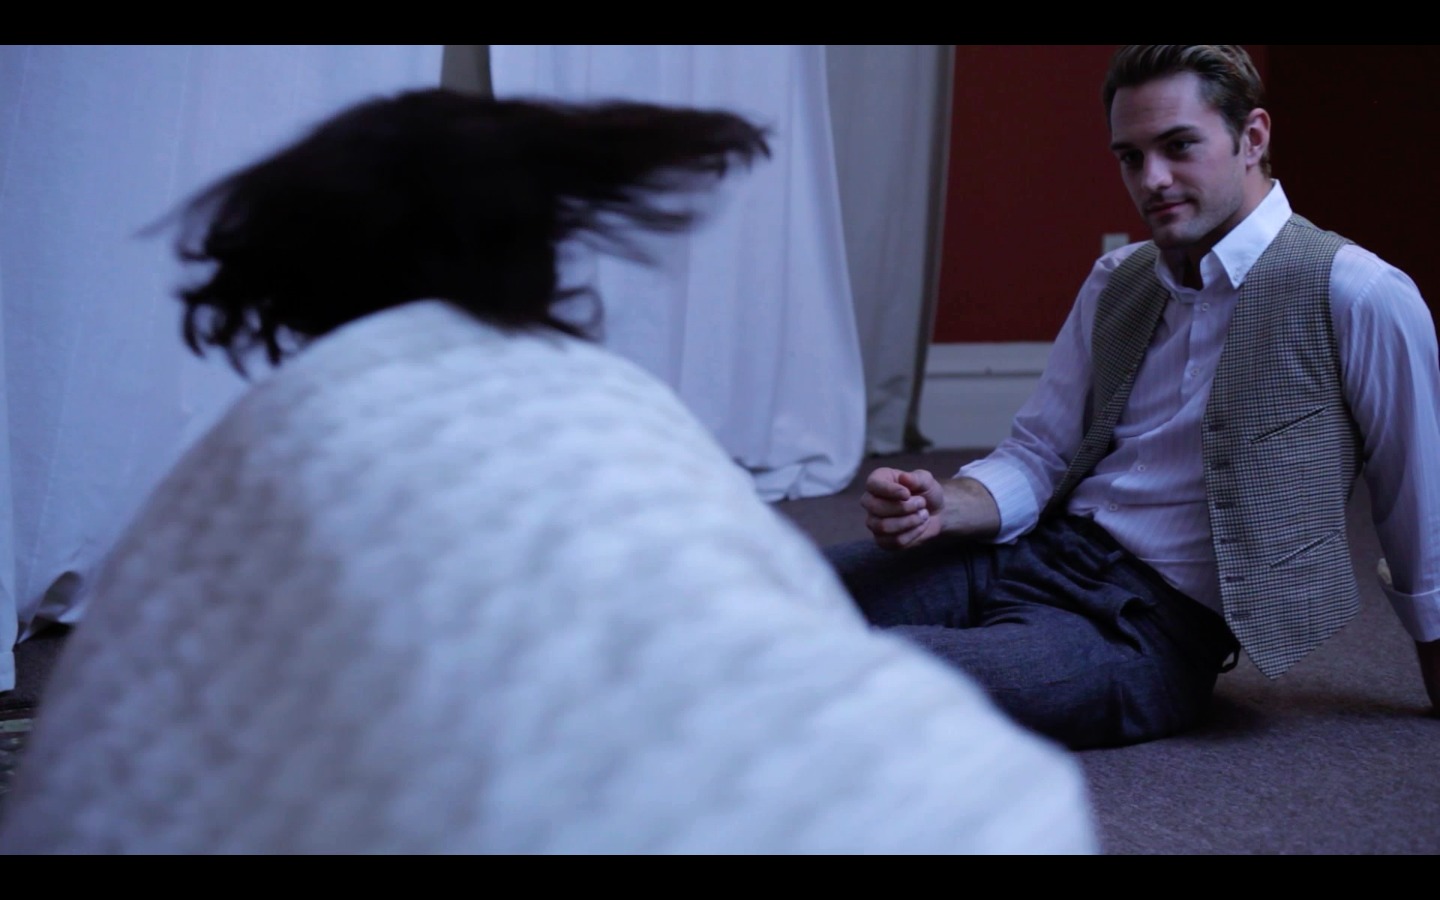 Production still from 'Fading' a short film written and directed by Michelle Musser.